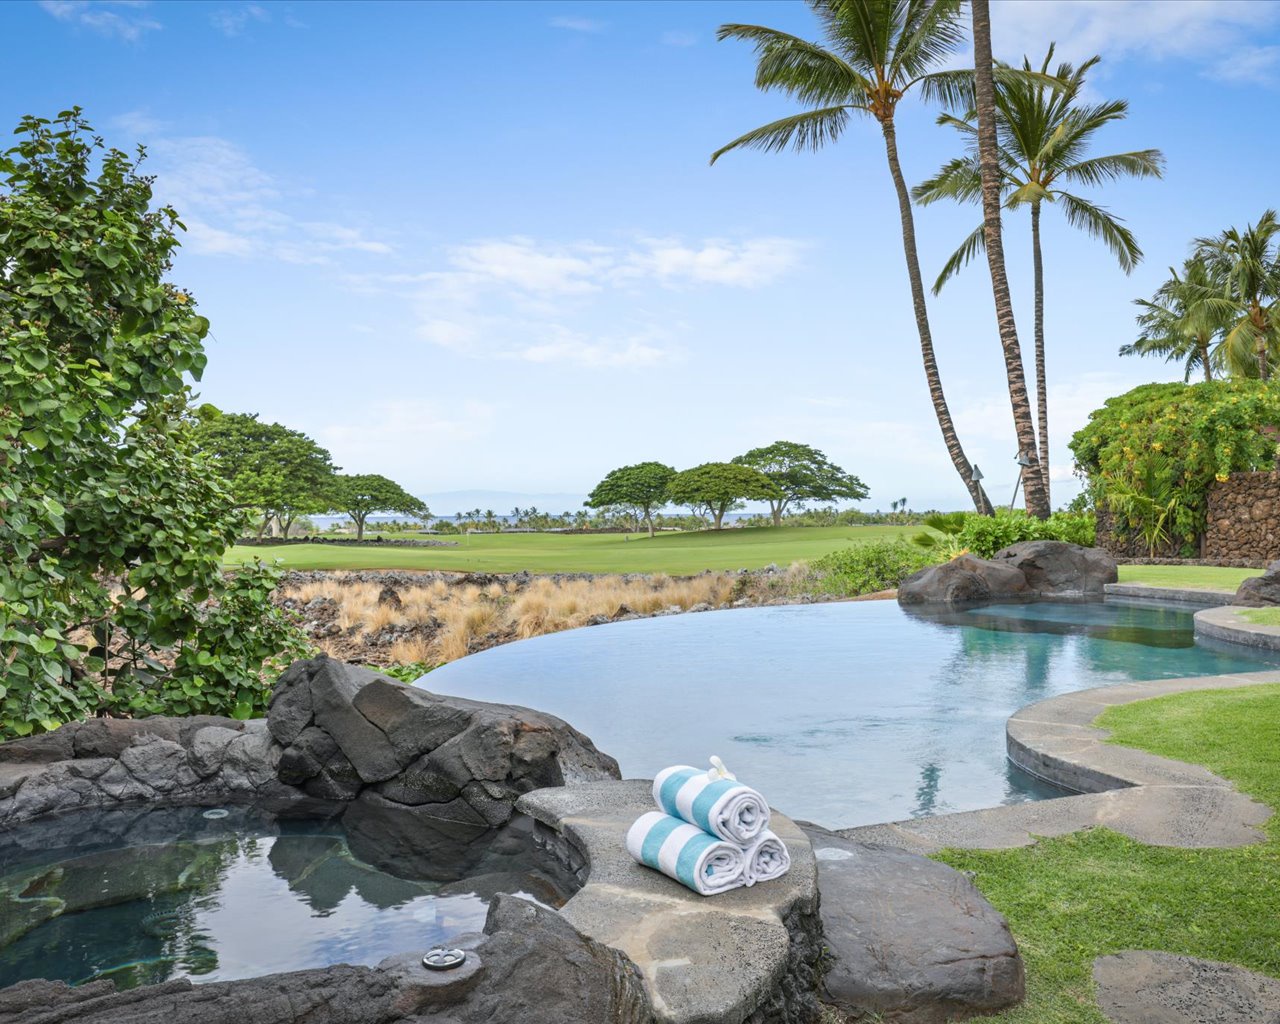 Kailua Kona Vacation Rentals, 3BD Pakui Street (131) Estate Home at Four Seasons Resort at Hualalai - A private oasis in paradise on a vacation to remember